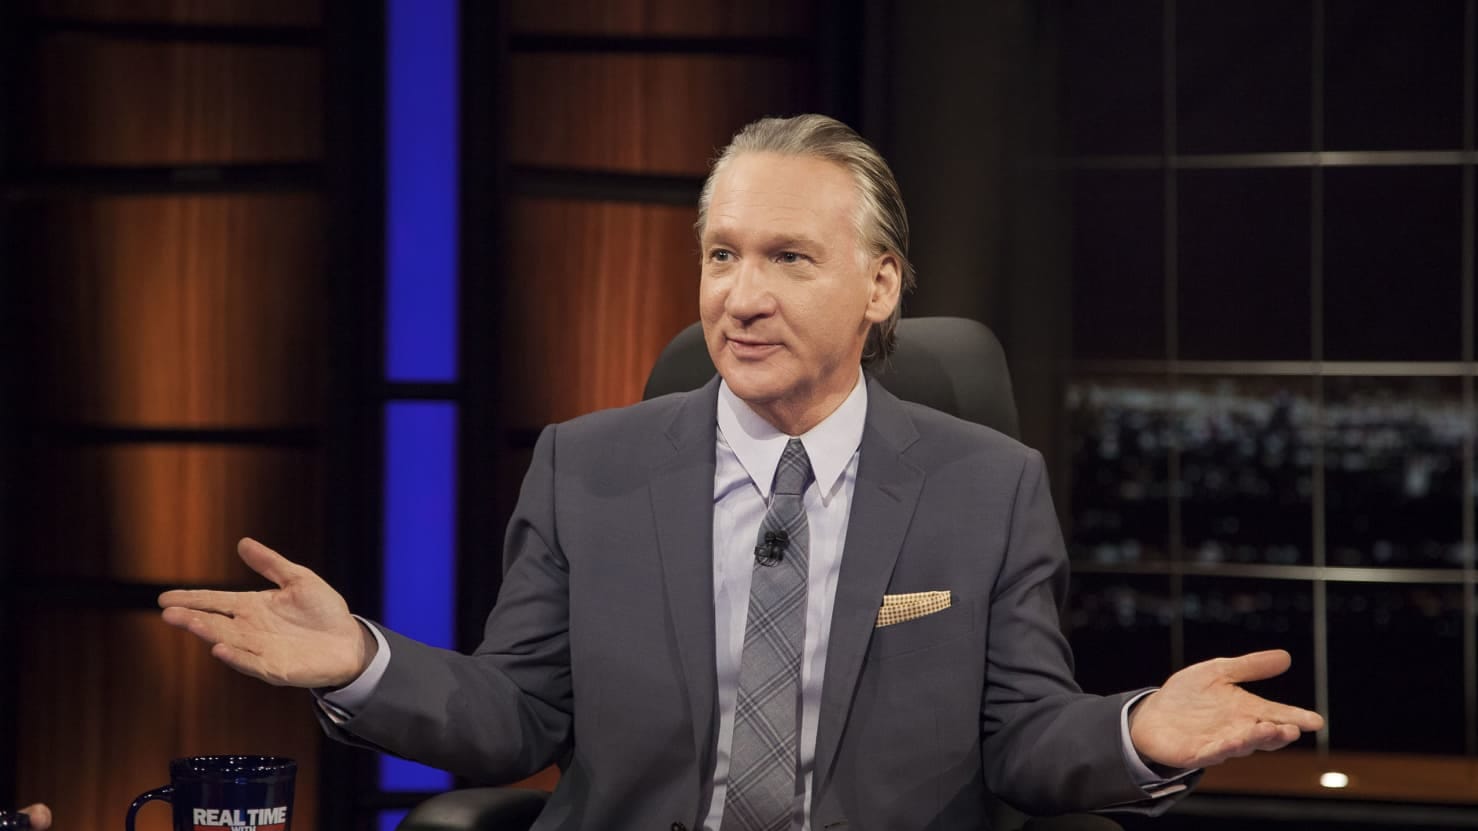 "I'm Over COVID, What the F**k Is the Use of Boosters?" - Bill Maher Goes Off on Medical Establishment, Experimental Vaccines in Latest Interview | The Gateway Pundit | by Jim Hoft